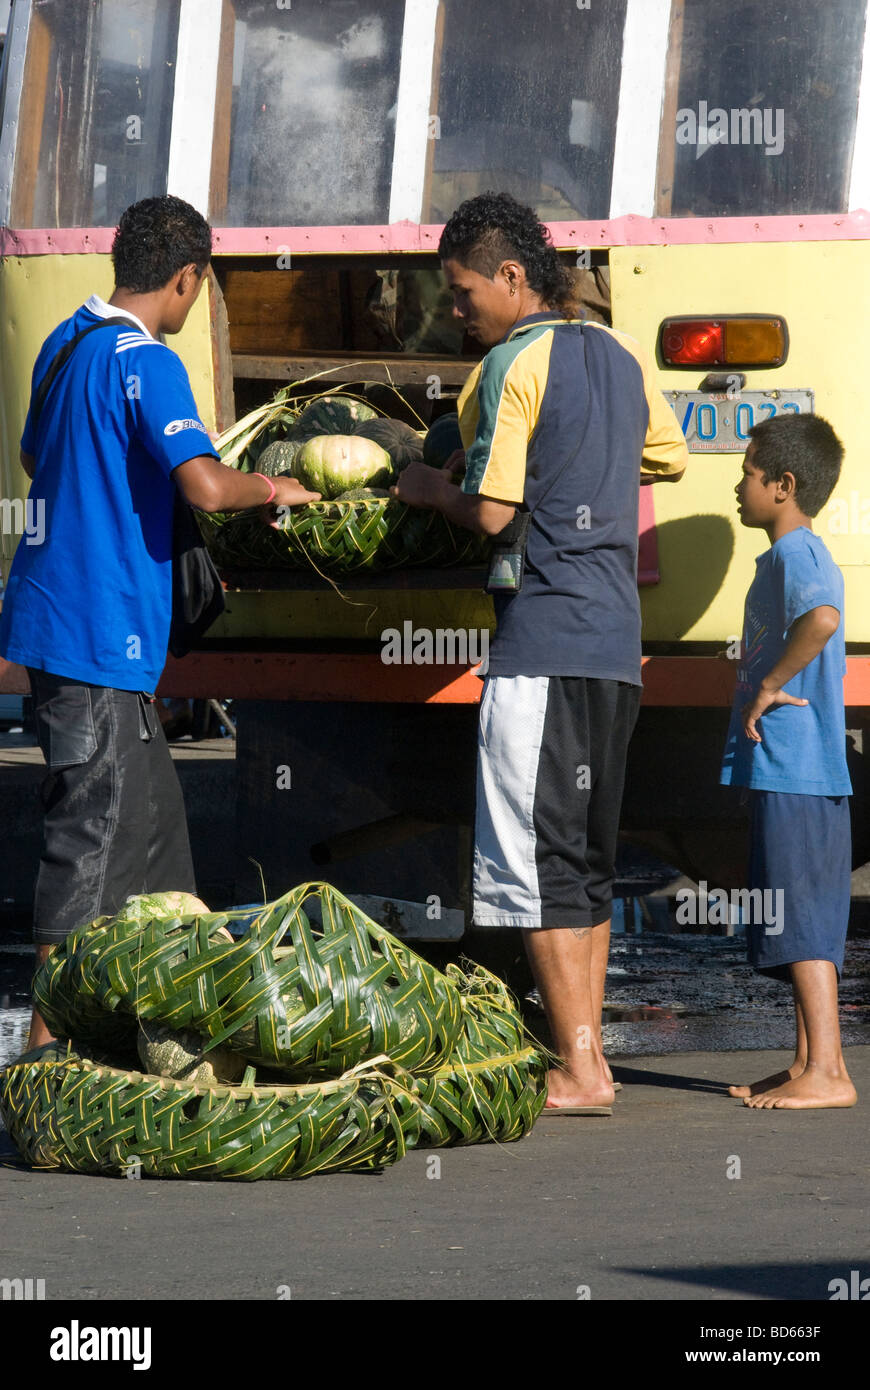 Unloading market produce from brightly coloured bus in Apia, Western Samoa Stock Photo